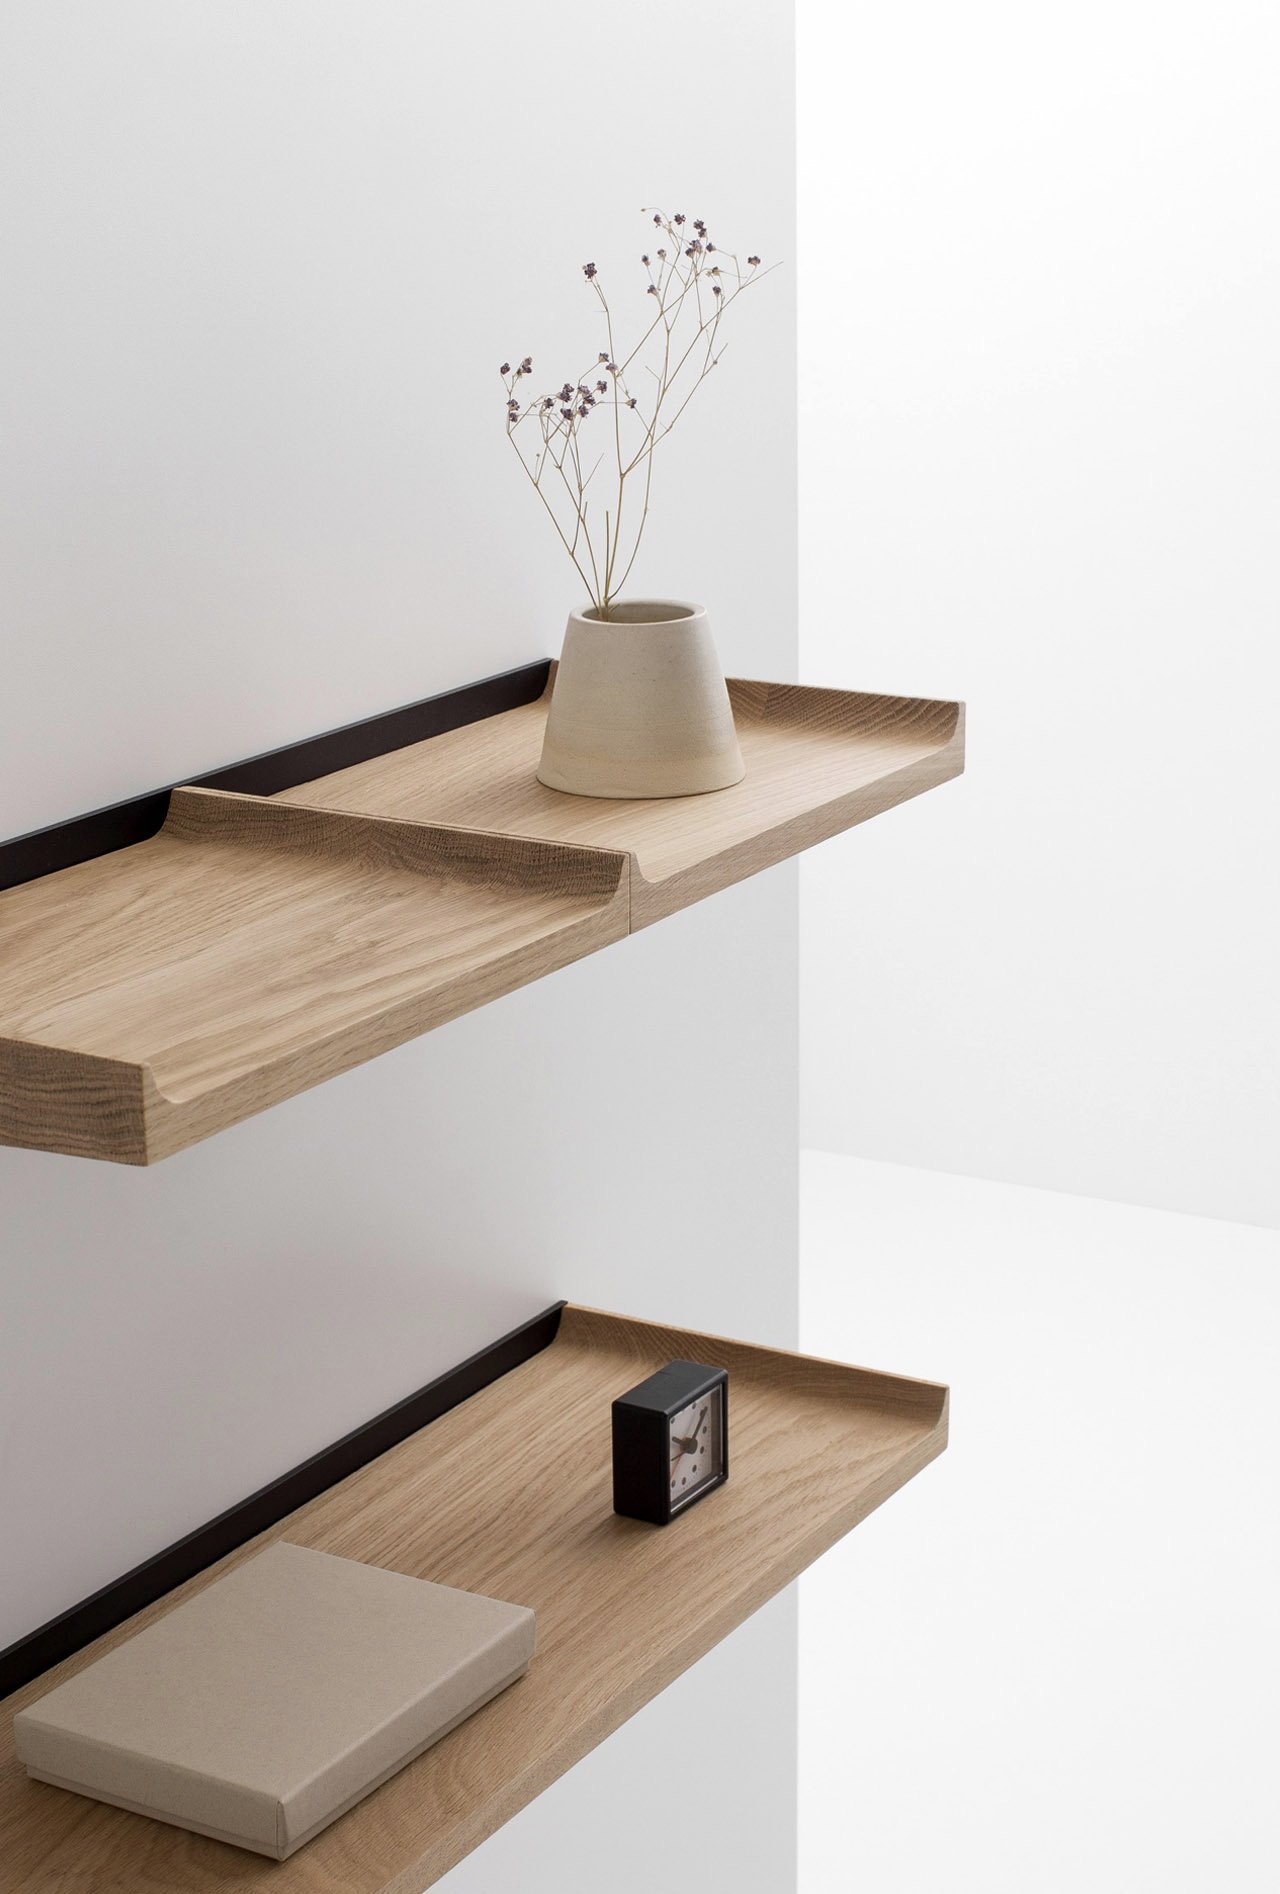 Top 10 modern storage solutions for your modern home - Yanko Design